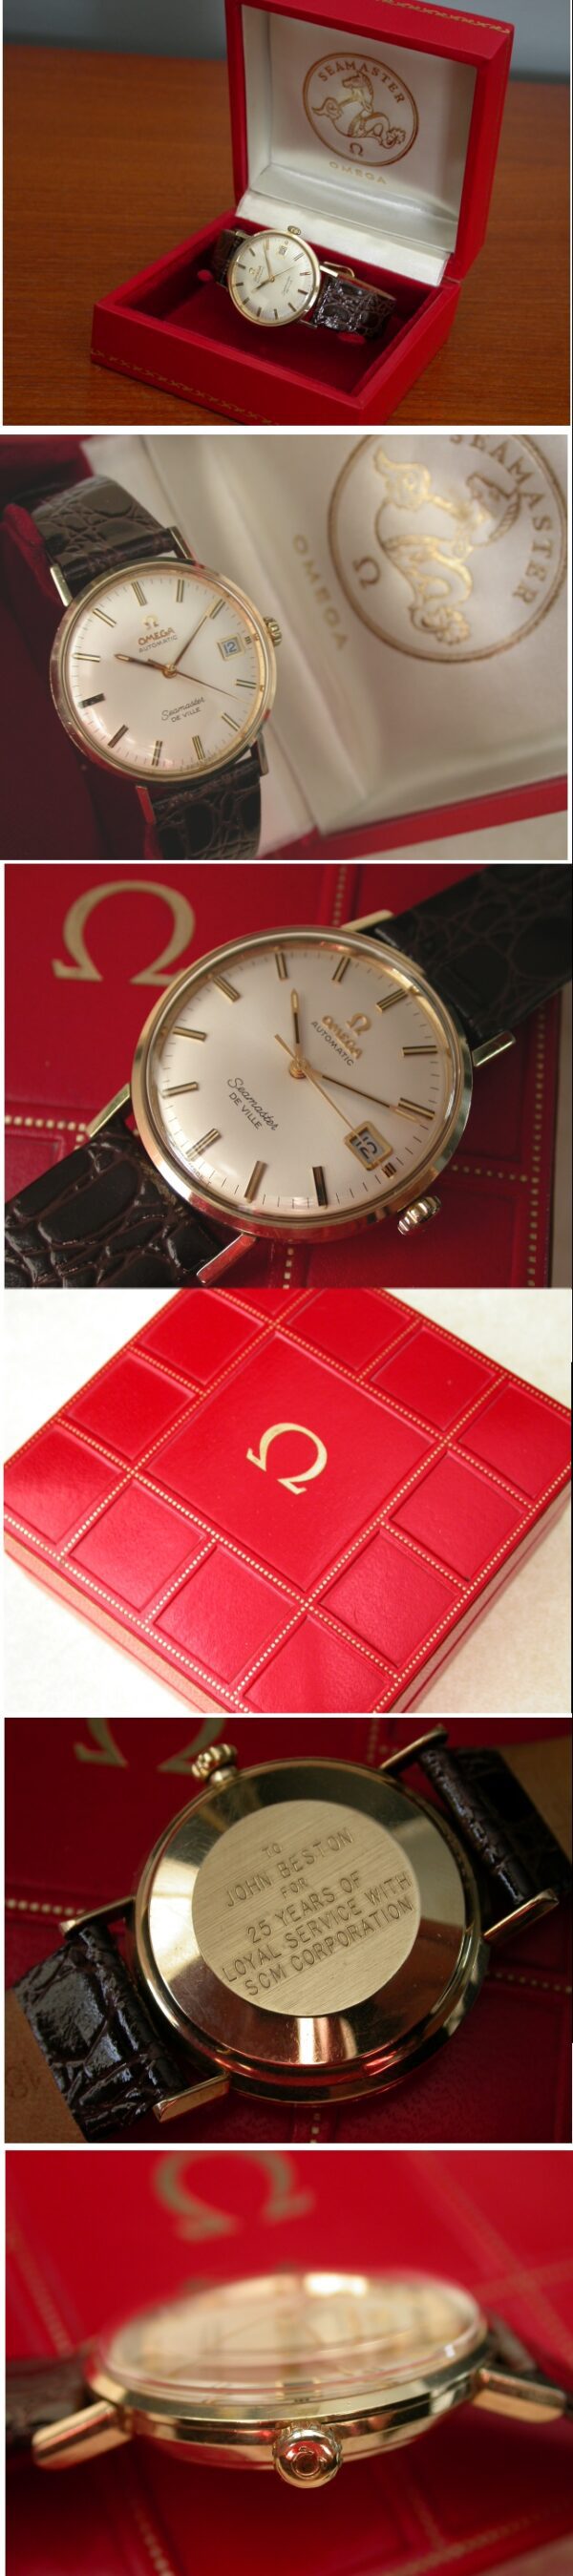 1960s Omega Seamaster De Ville gold-capped watch with original rare box, signed crown, crystal, and cleaned automatic winding movement.